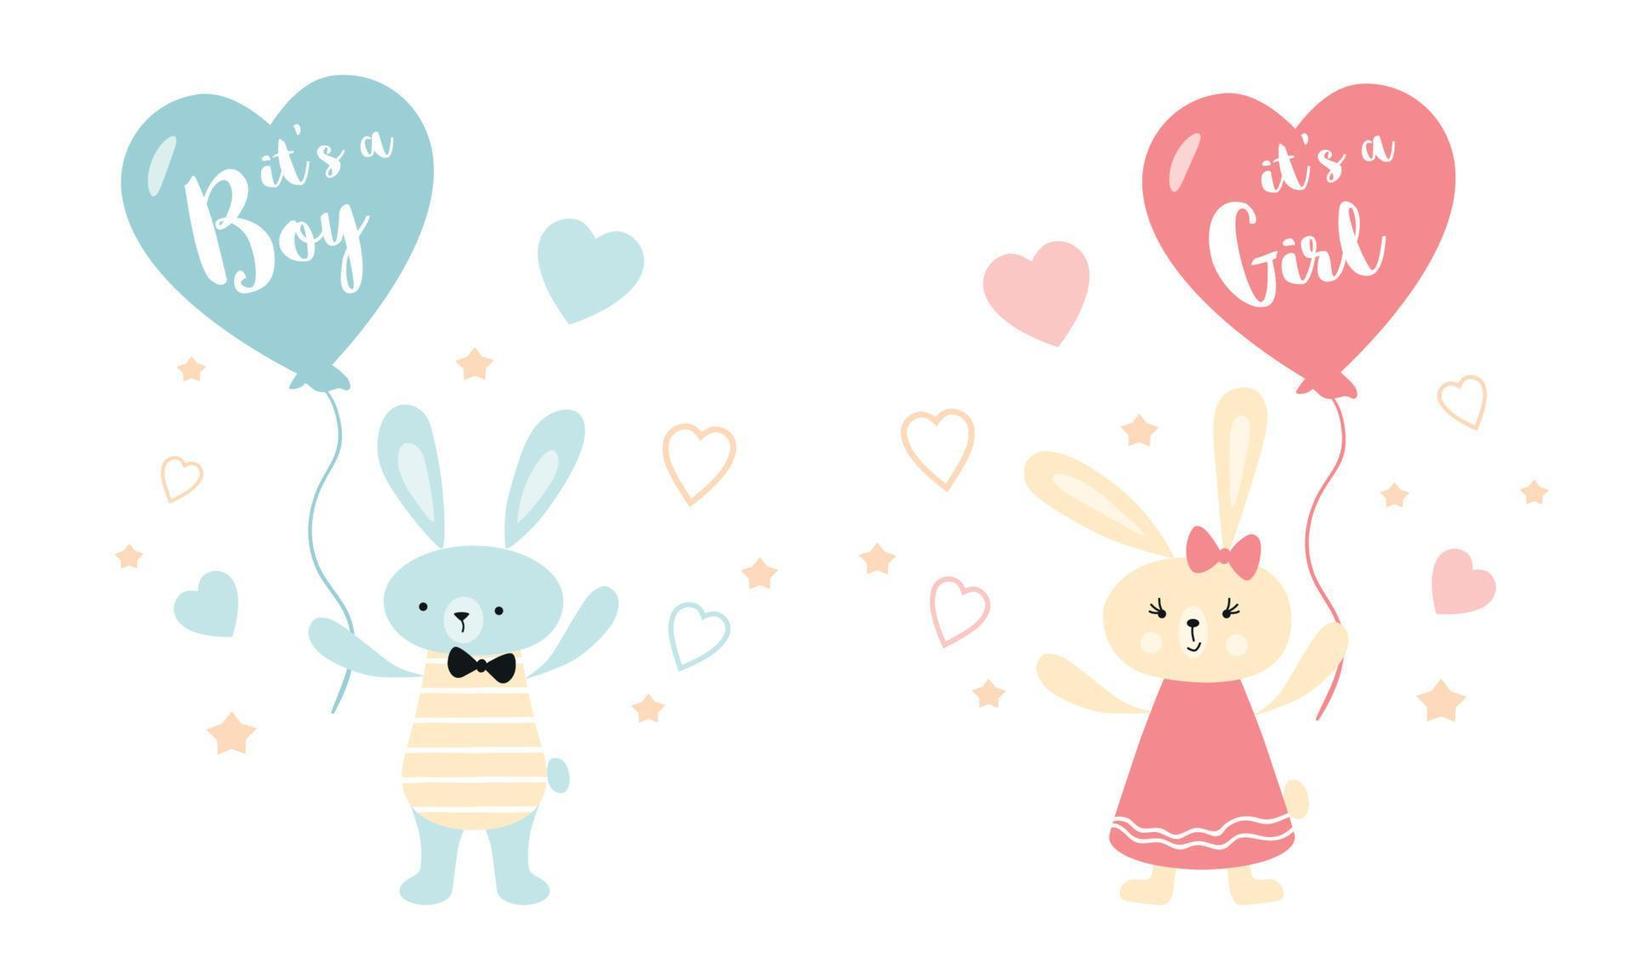 It's a boy it's a girl Vector greeting card. Baby shower card. Baby announcement card design element rabbit balloon Baby shower party design element Bunny rabbit baloon Illustration isolated on white.